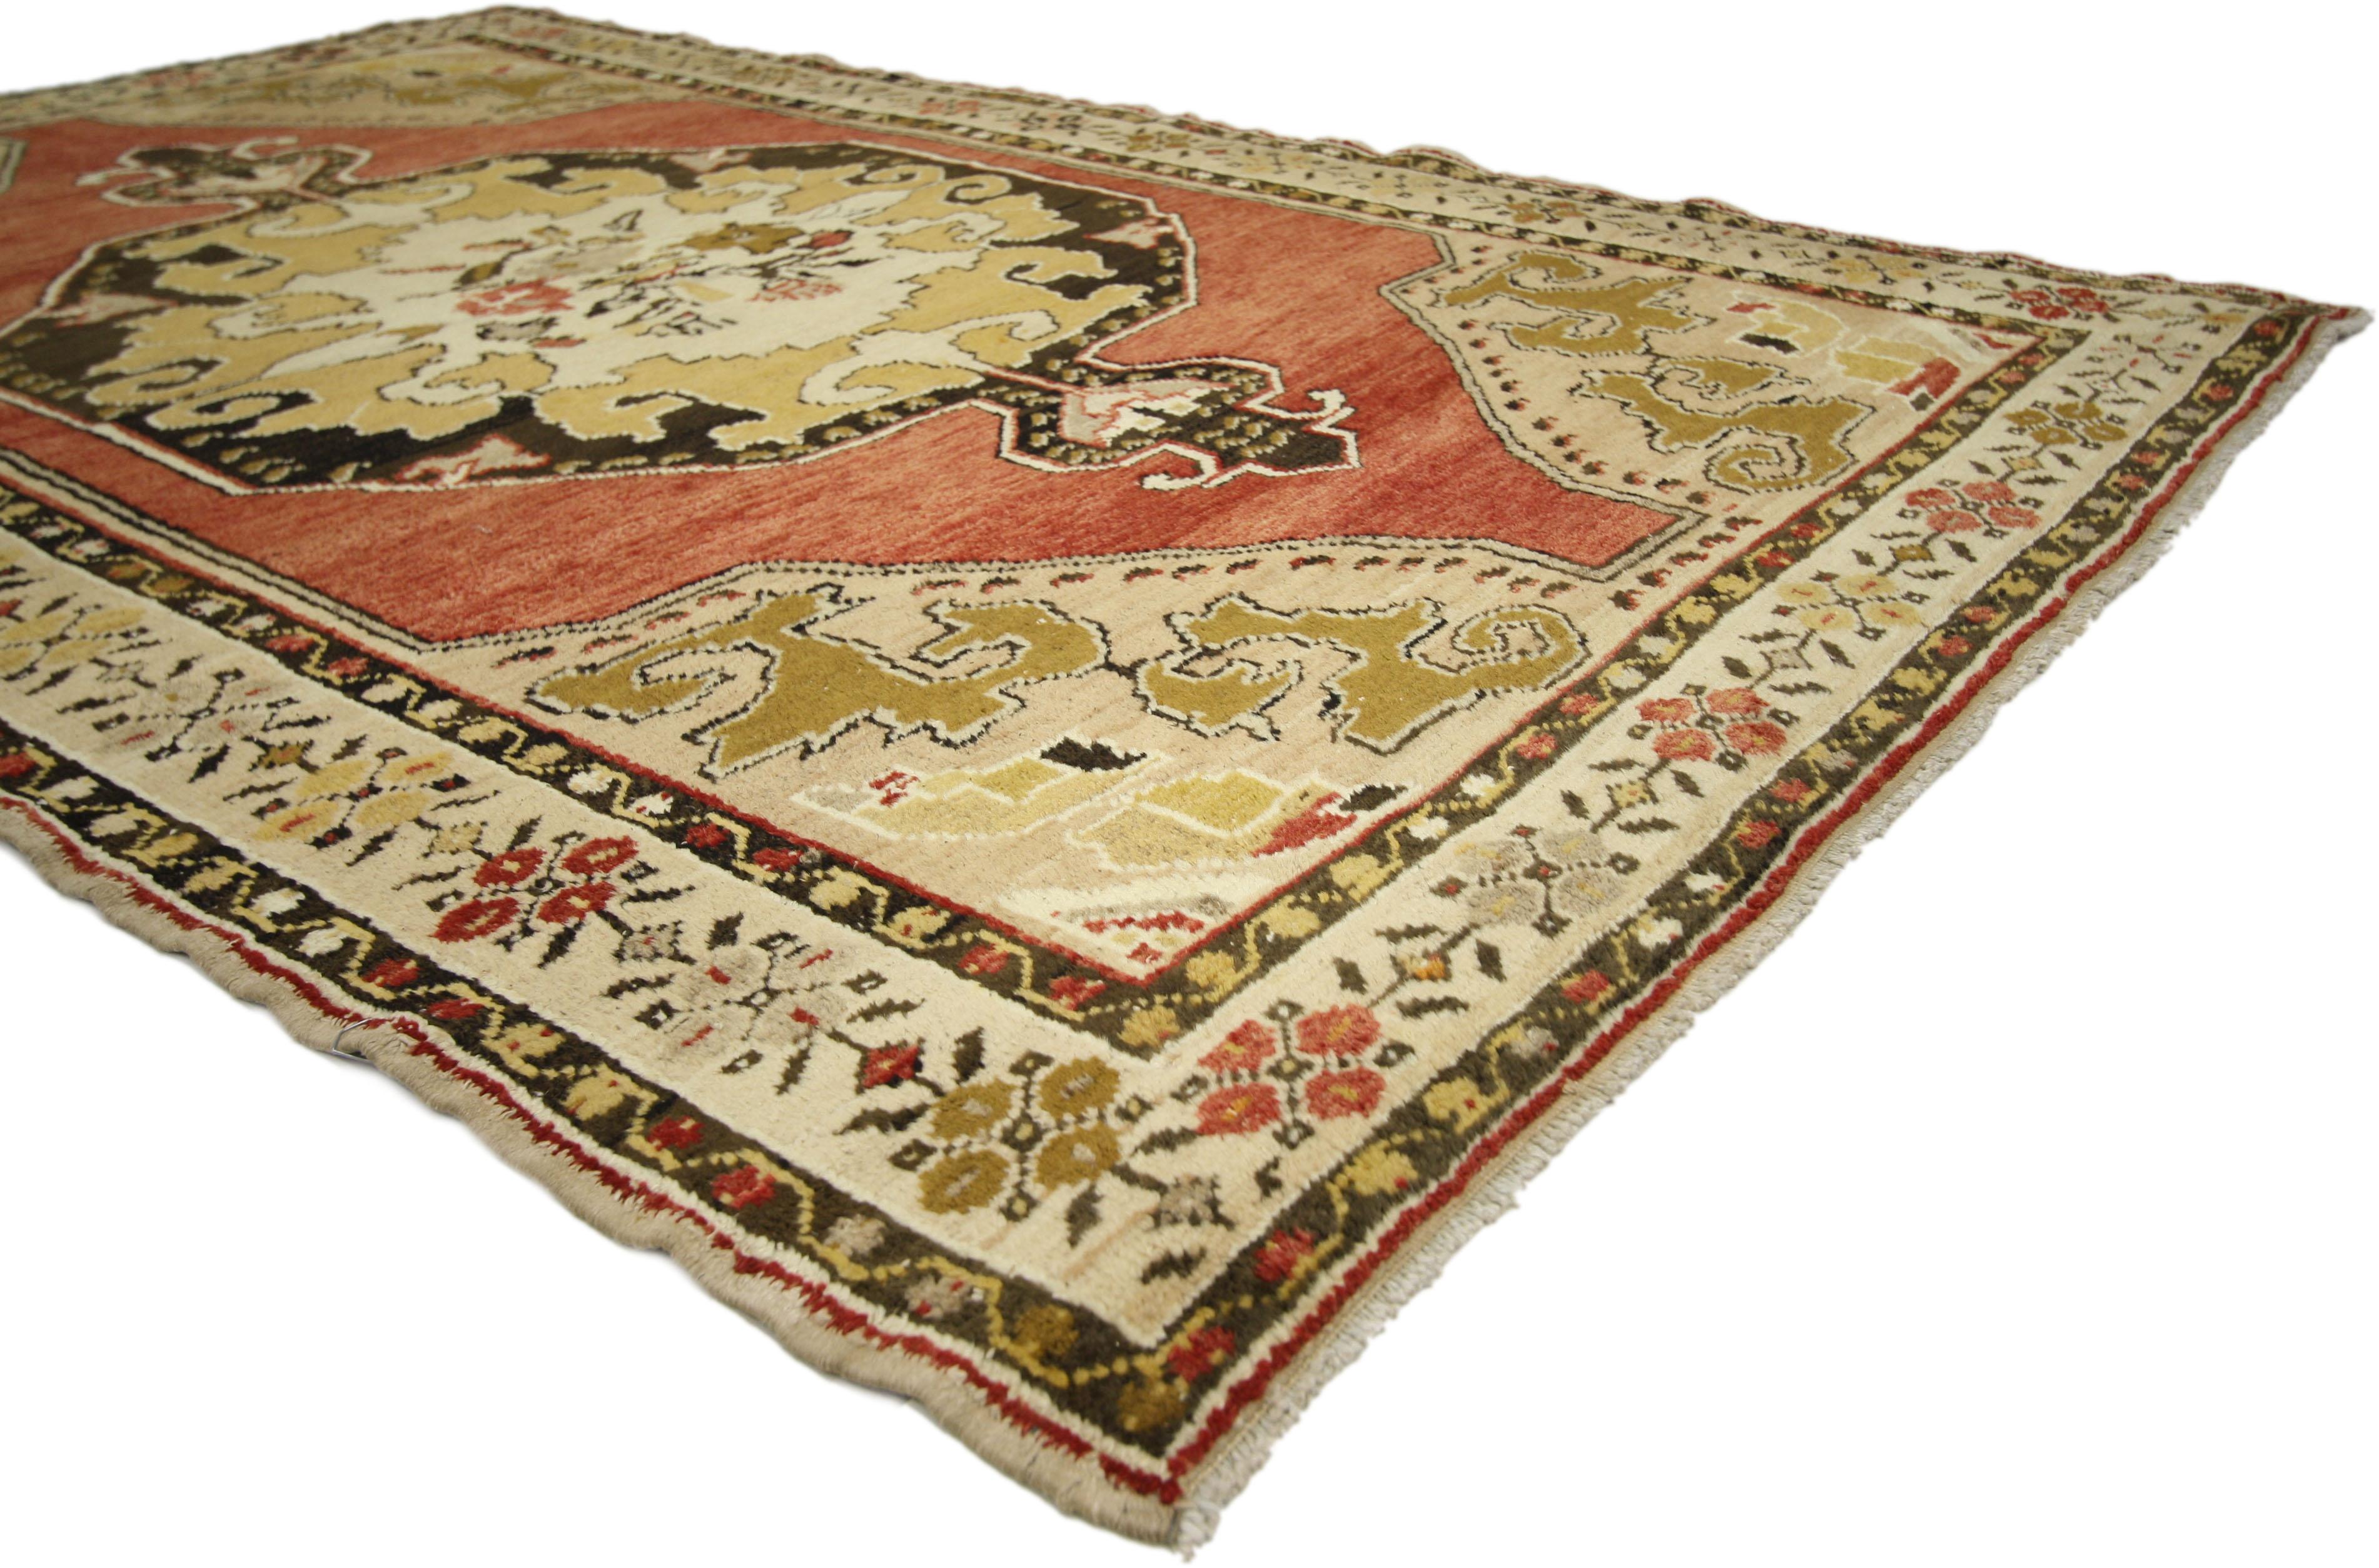 50123, vintage Turkish Oushak rug. This opulent Turkish Oushak rug features a central medallion and corner design. The central medallion features a bouquet with outlined flowers on a creamy-beige background contrasting with black, brown and red. The